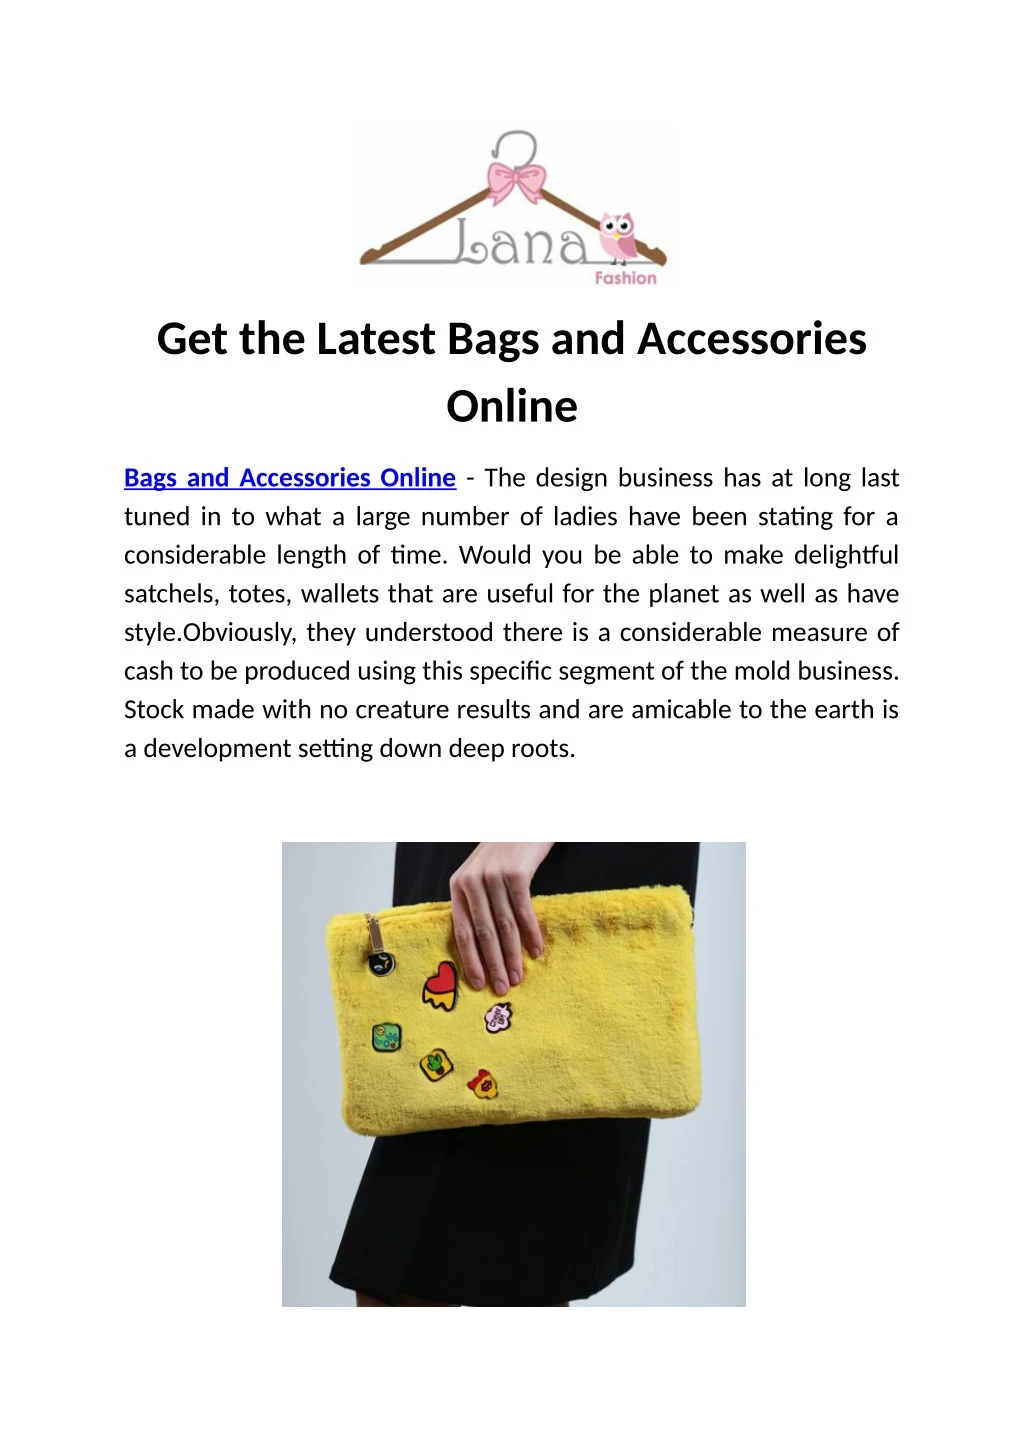 get the latest bags and accessories online